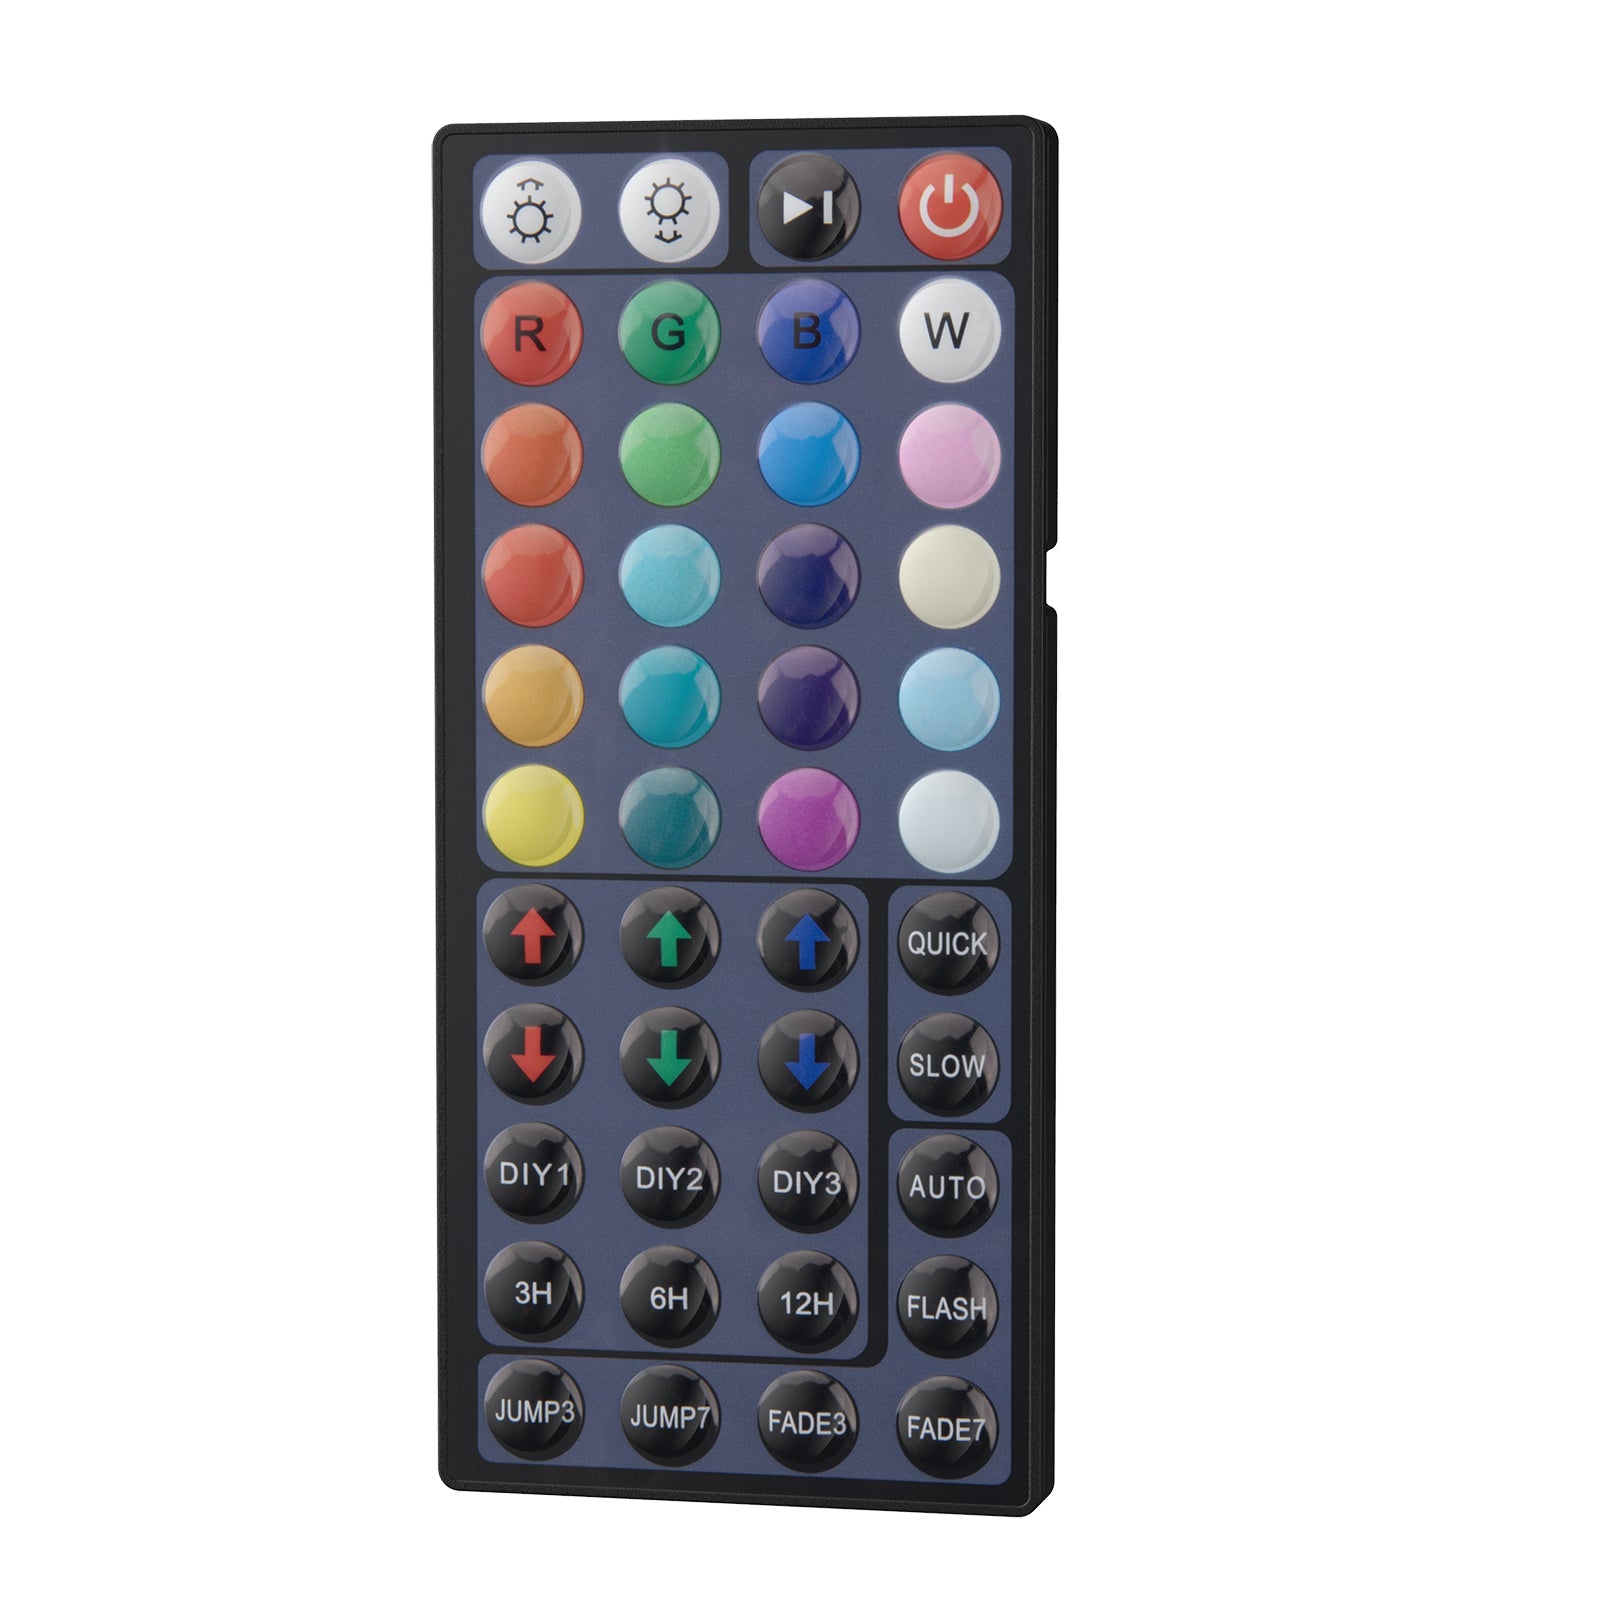 RGB Controller with 44-Key Wireless IR Remote for RGB LED Light